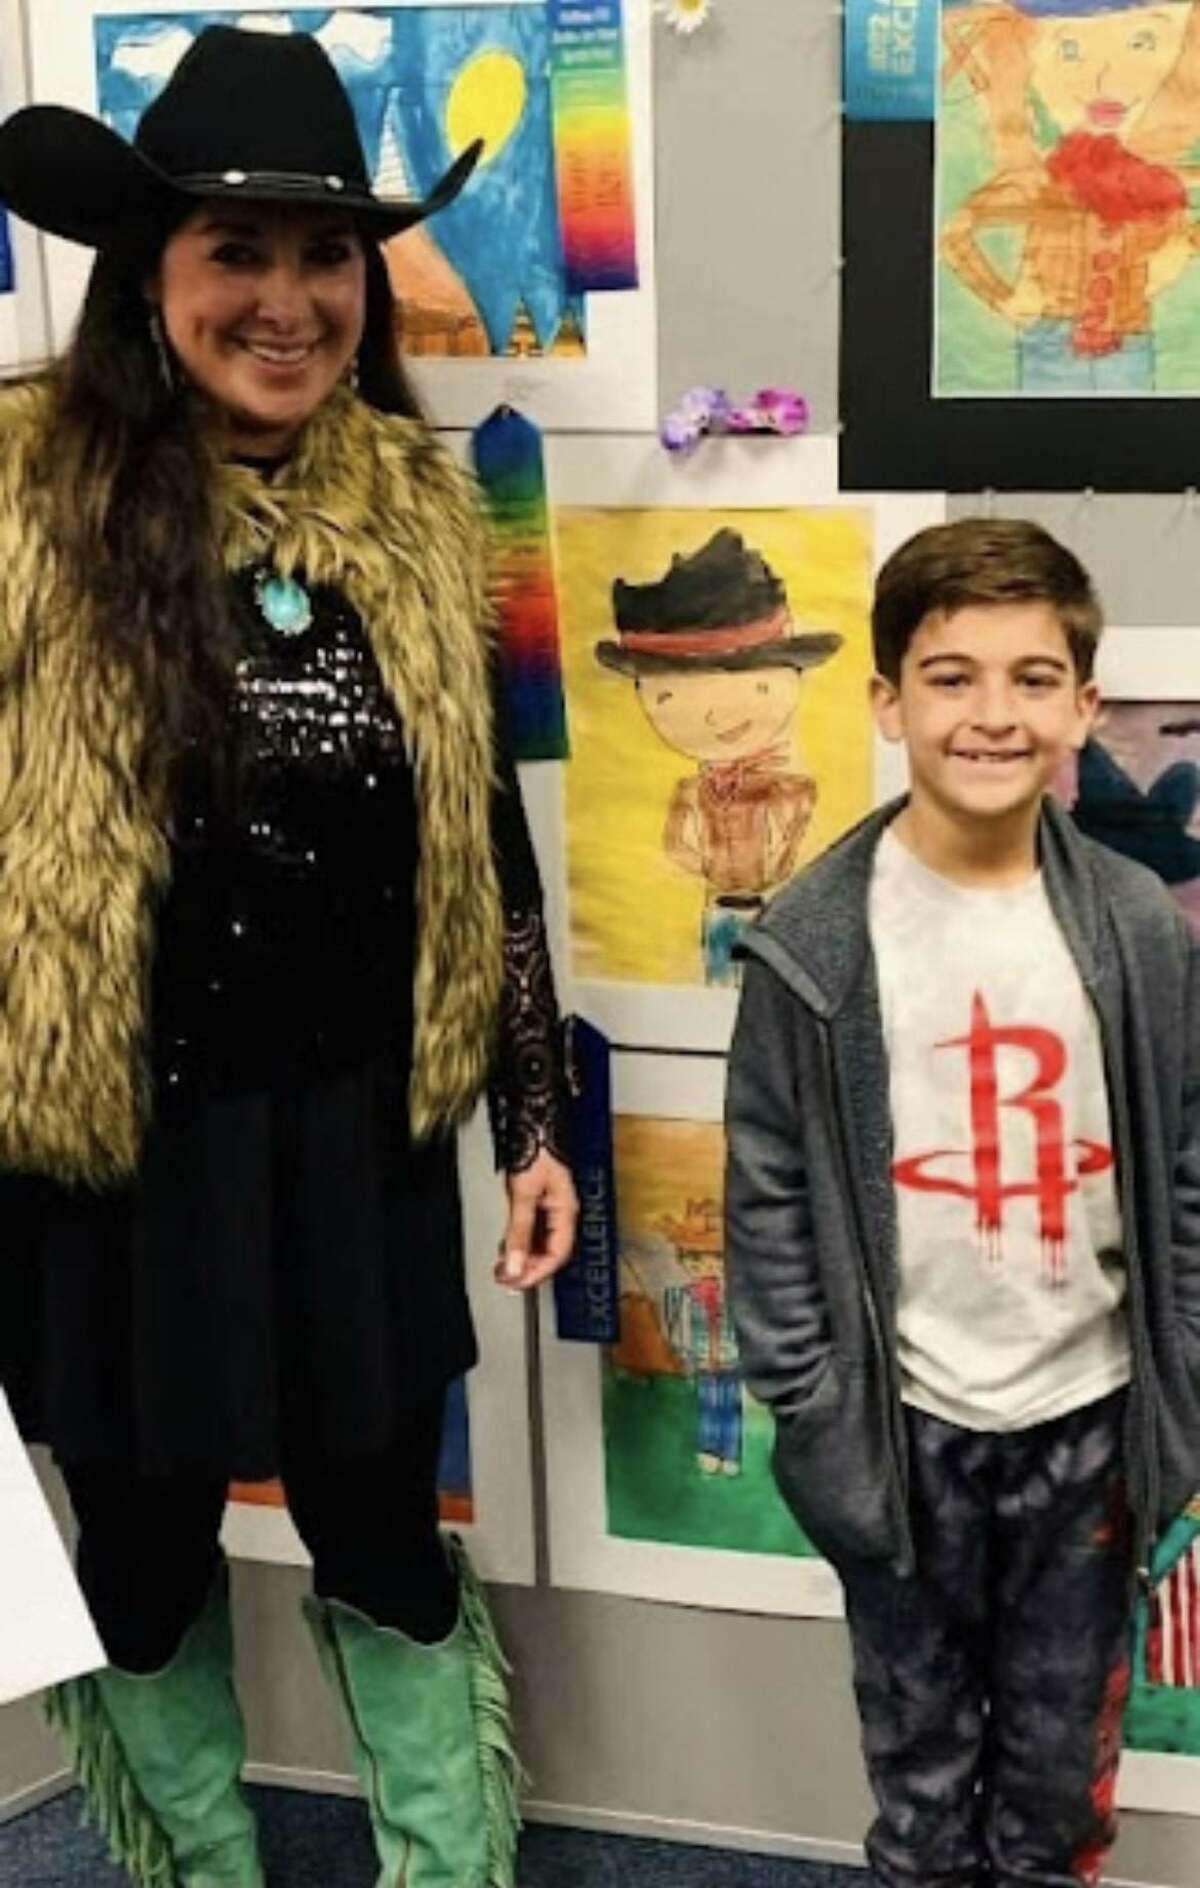 Huffman Art Liaison Victoria Parker with one of her art students. The winners will be taken to the Houston Livestock Show & Rodeo art competition next week. For those who missed the exhibit, works can also be viewed on the Huffman Visual Arts Facebook page.